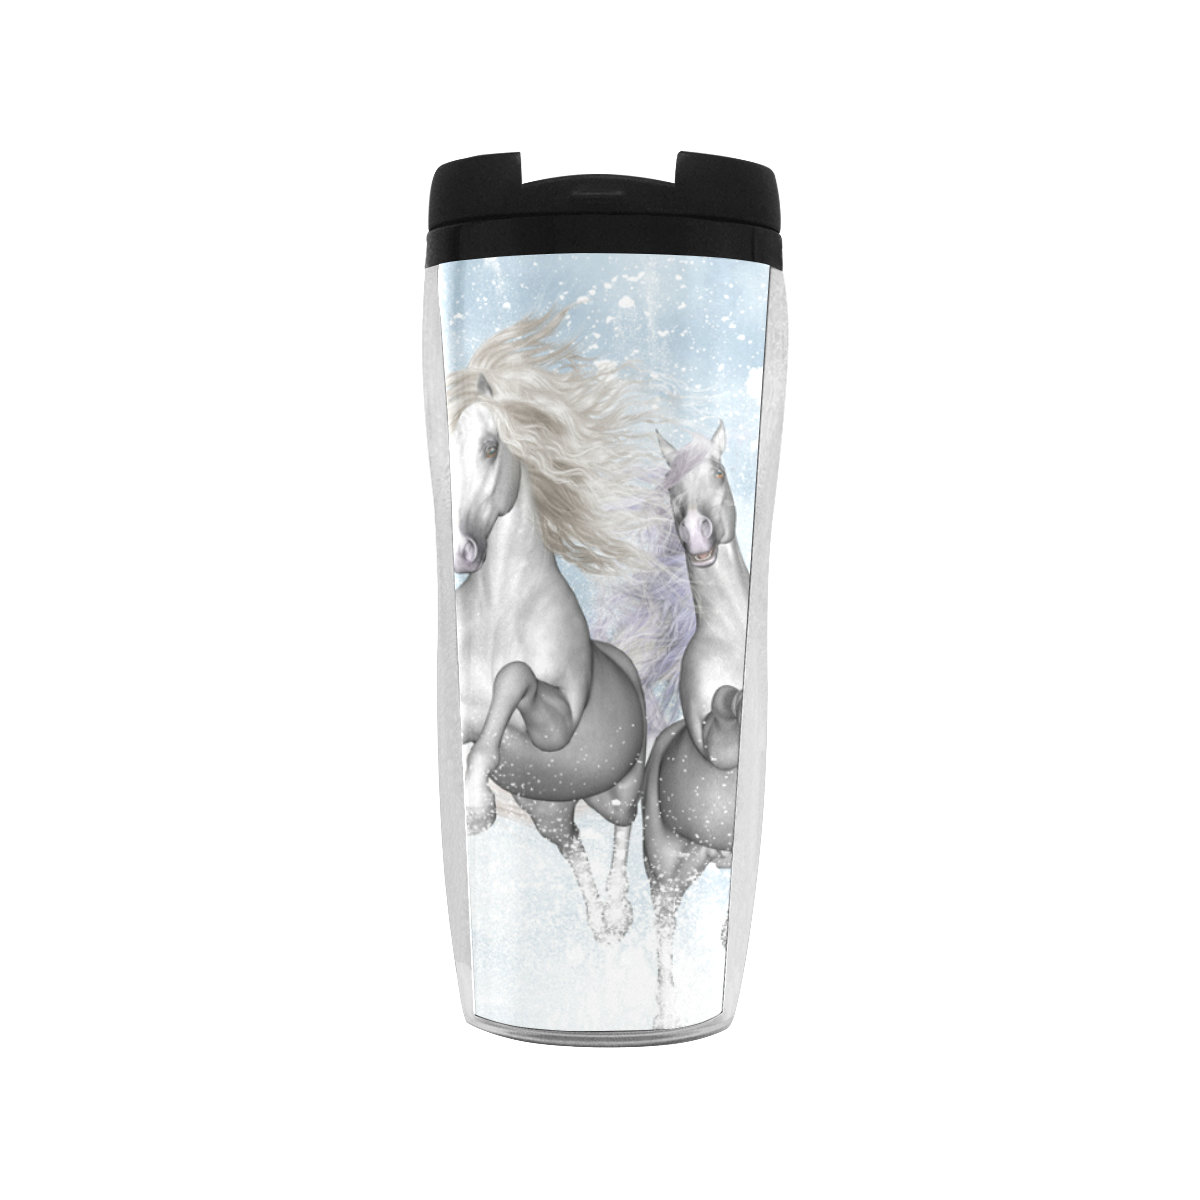 Awesome white wild horses Reusable Coffee Cup (11.8oz)